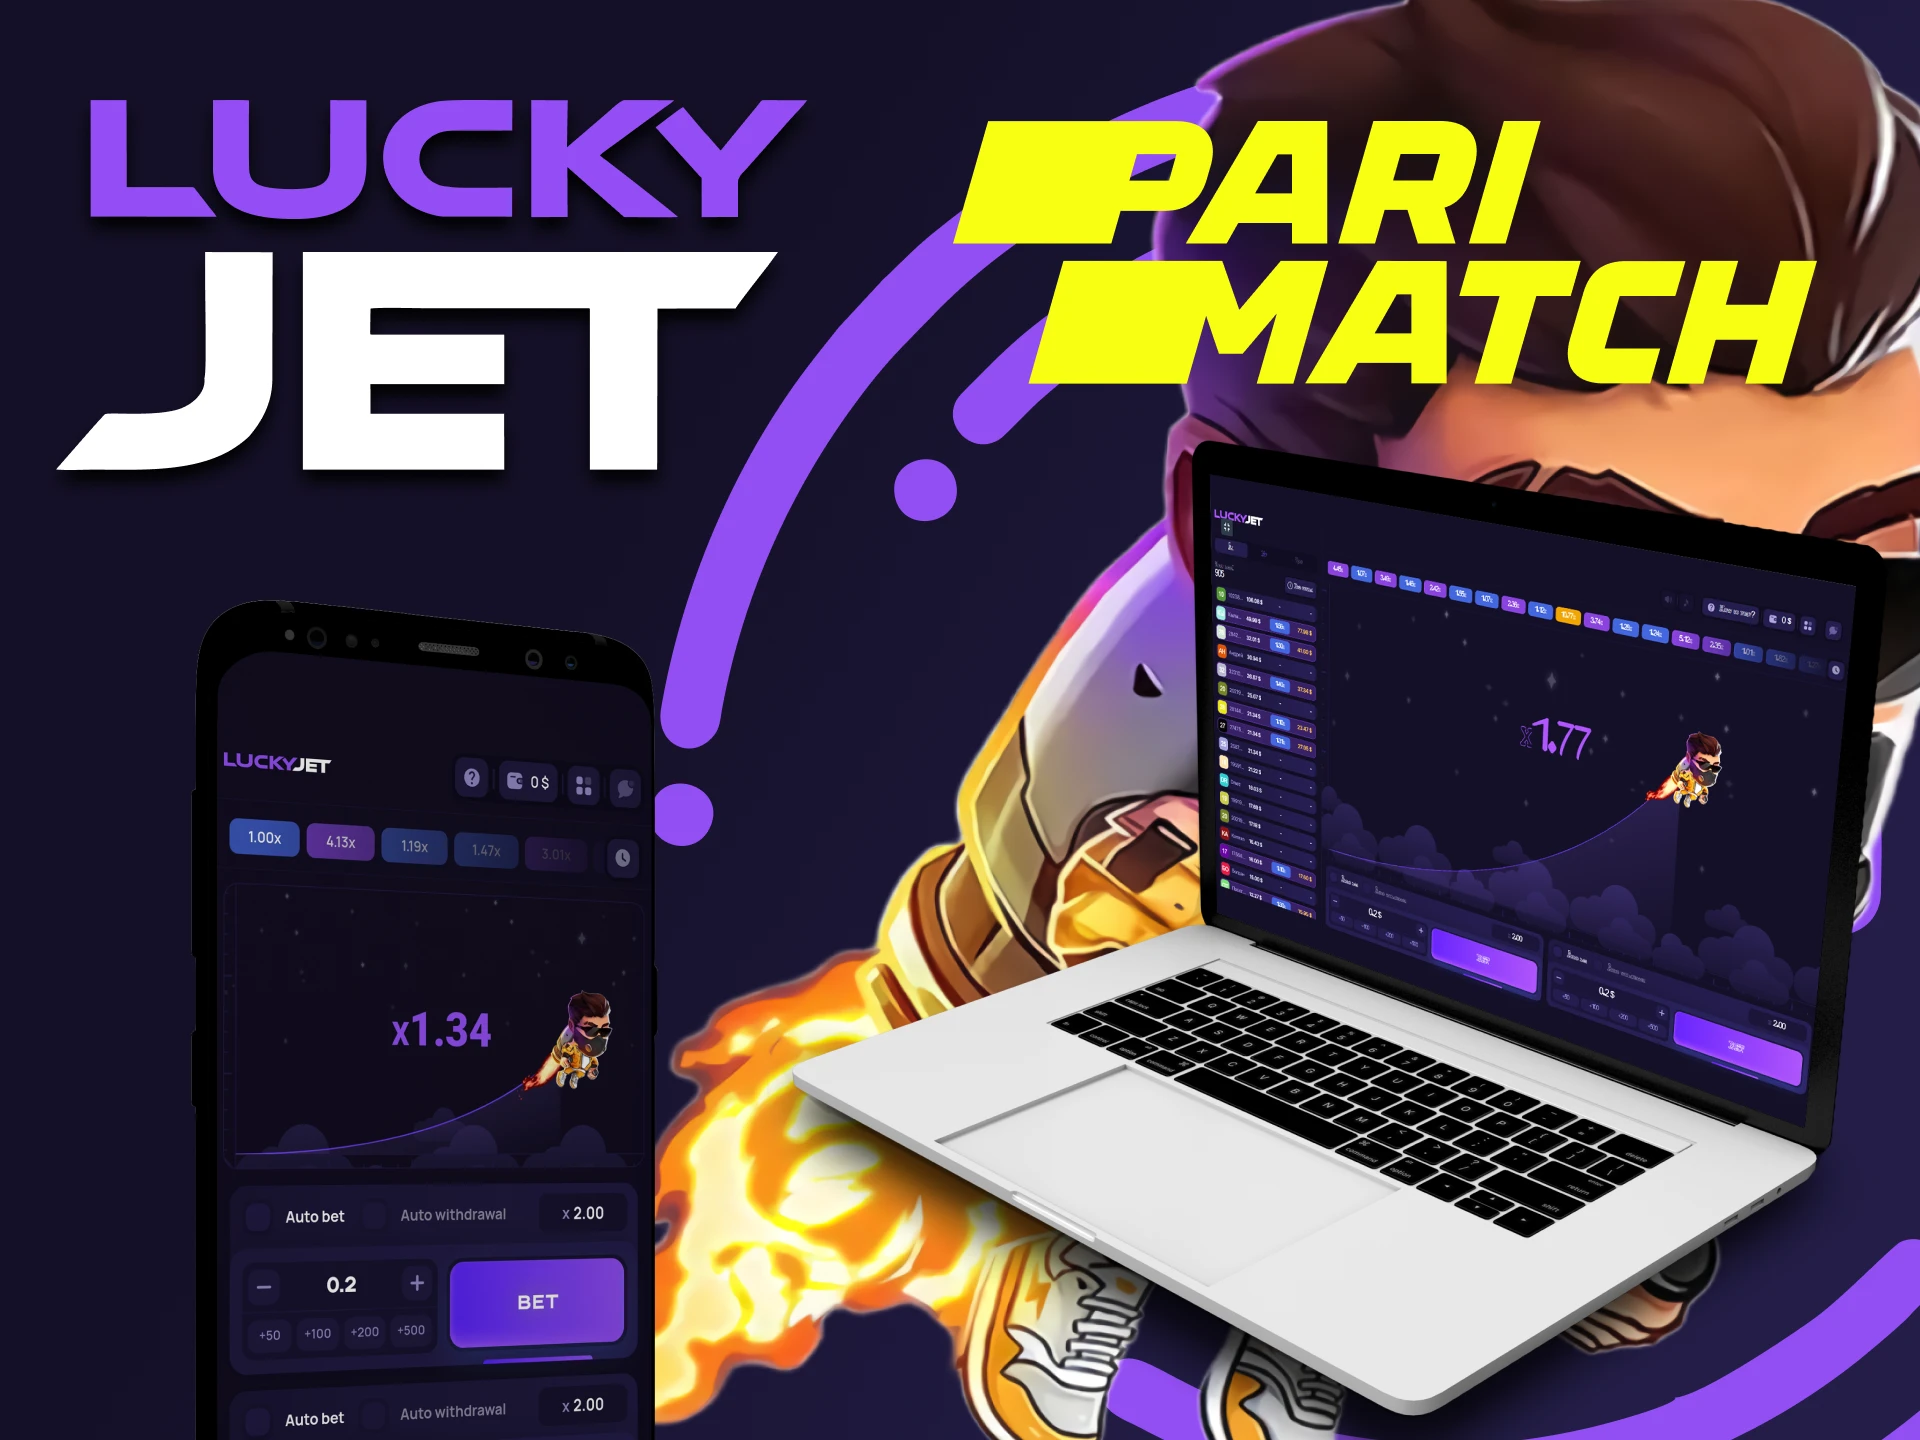 Find out about devices for playing Lucky Jet at Parimatch.